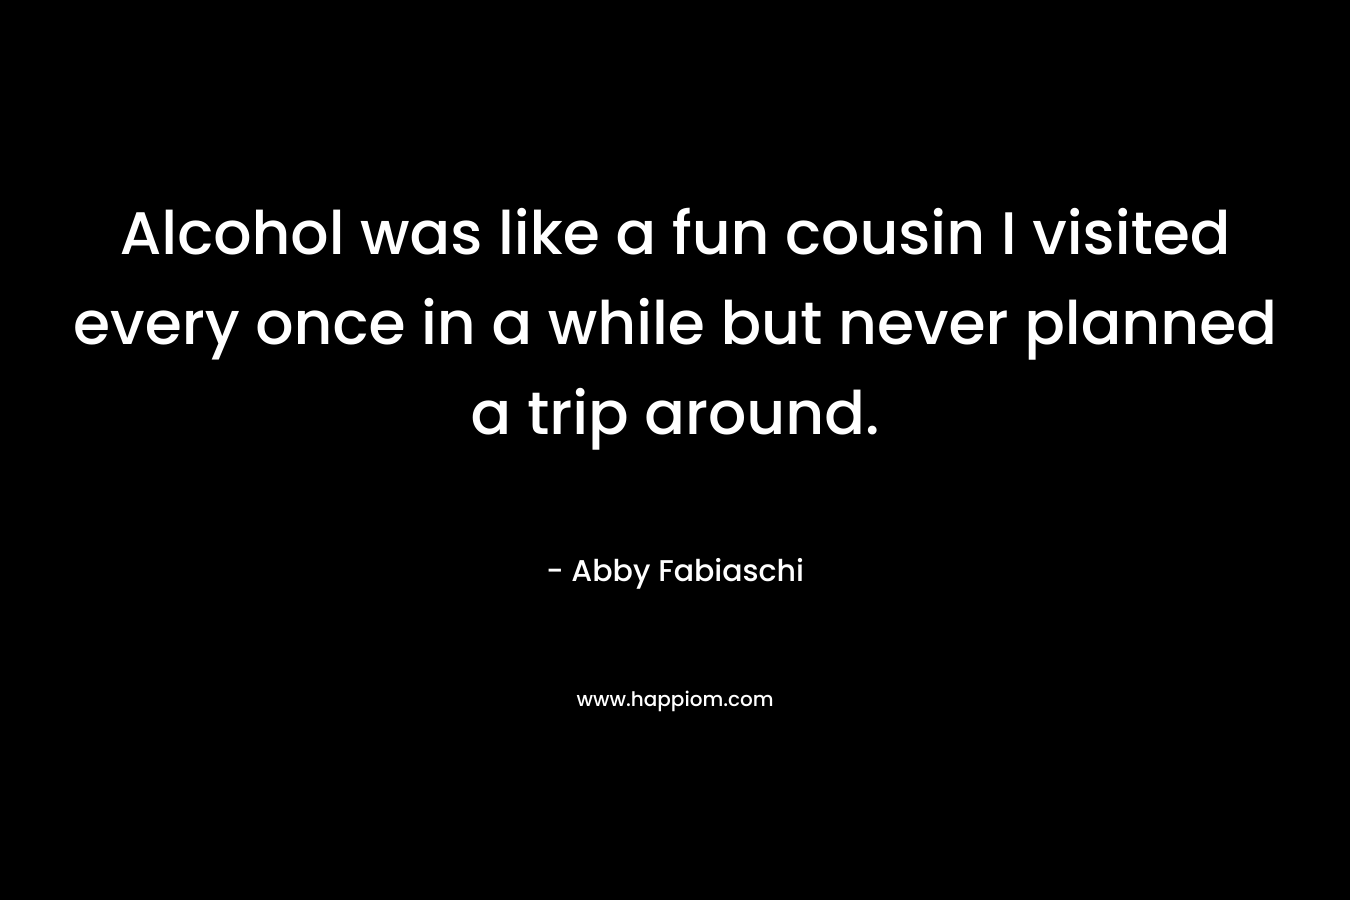 Alcohol was like a fun cousin I visited every once in a while but never planned a trip around. – Abby Fabiaschi